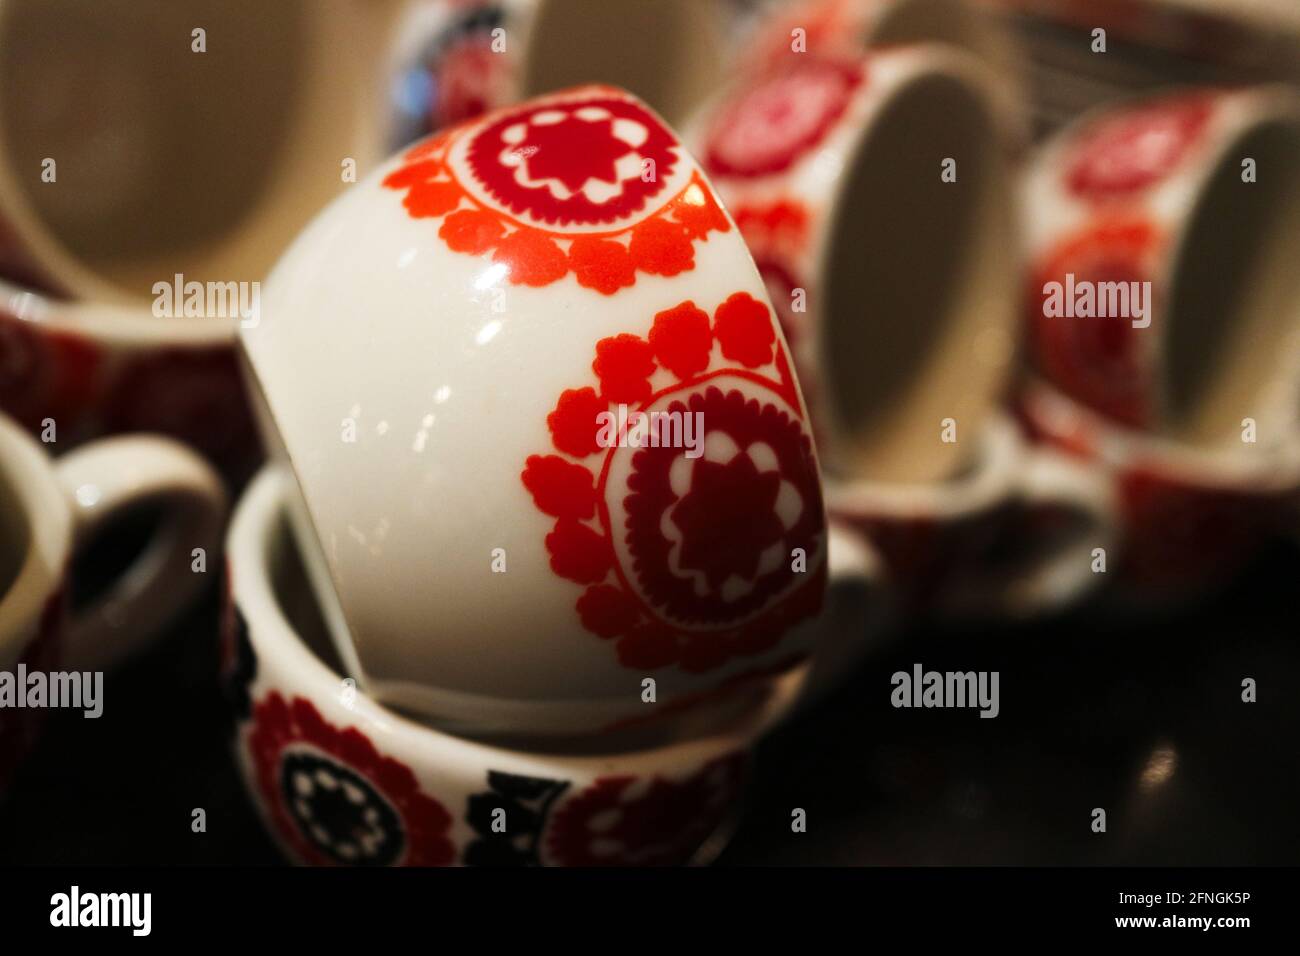 Kuwait City, Kuwait - May 5, 2021: Small Turkish coffee cups with orange floral design Stock Photo